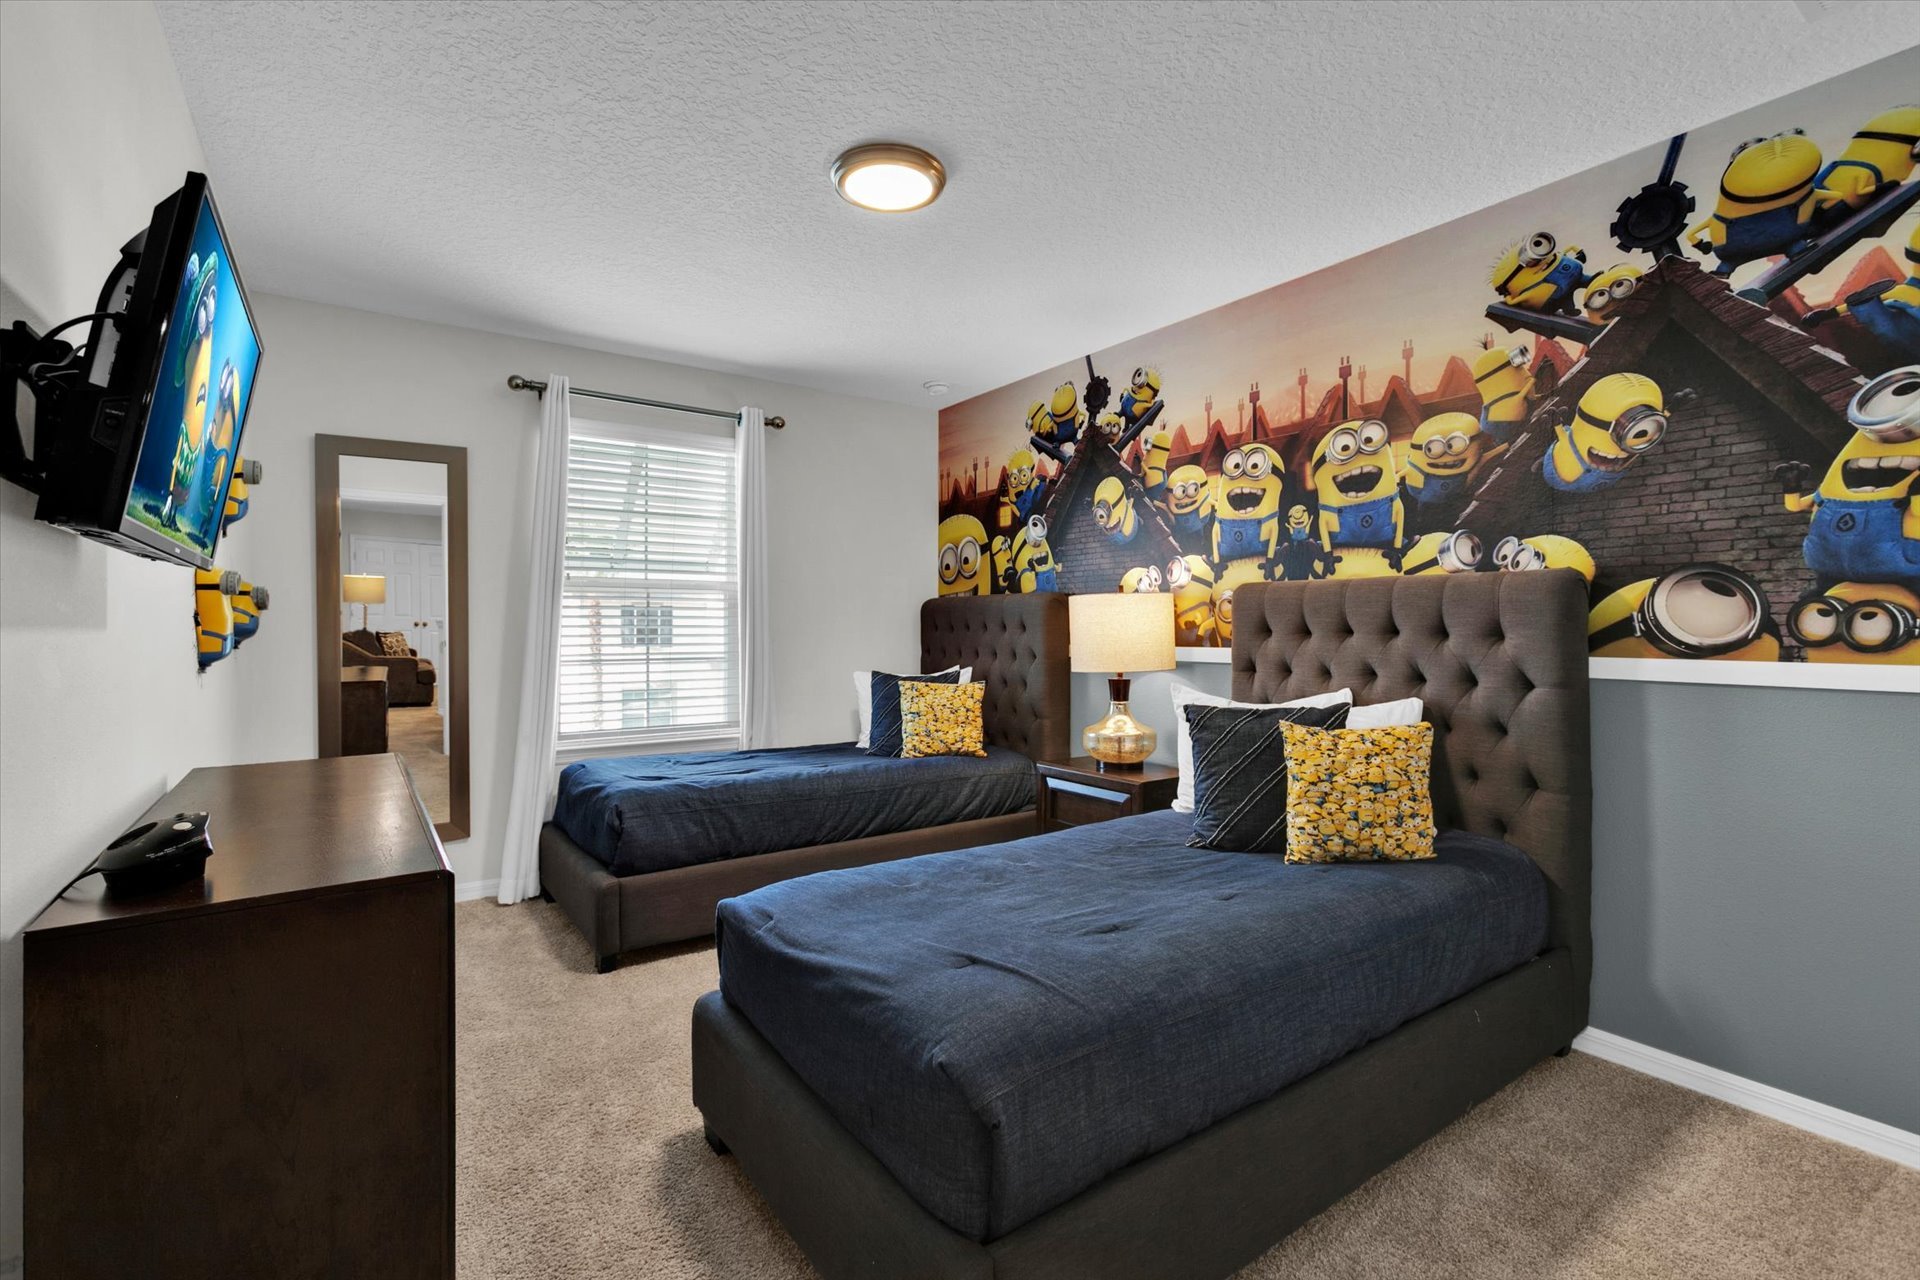 Two Twins Bedroom 5 Upstairs
Minion Theme